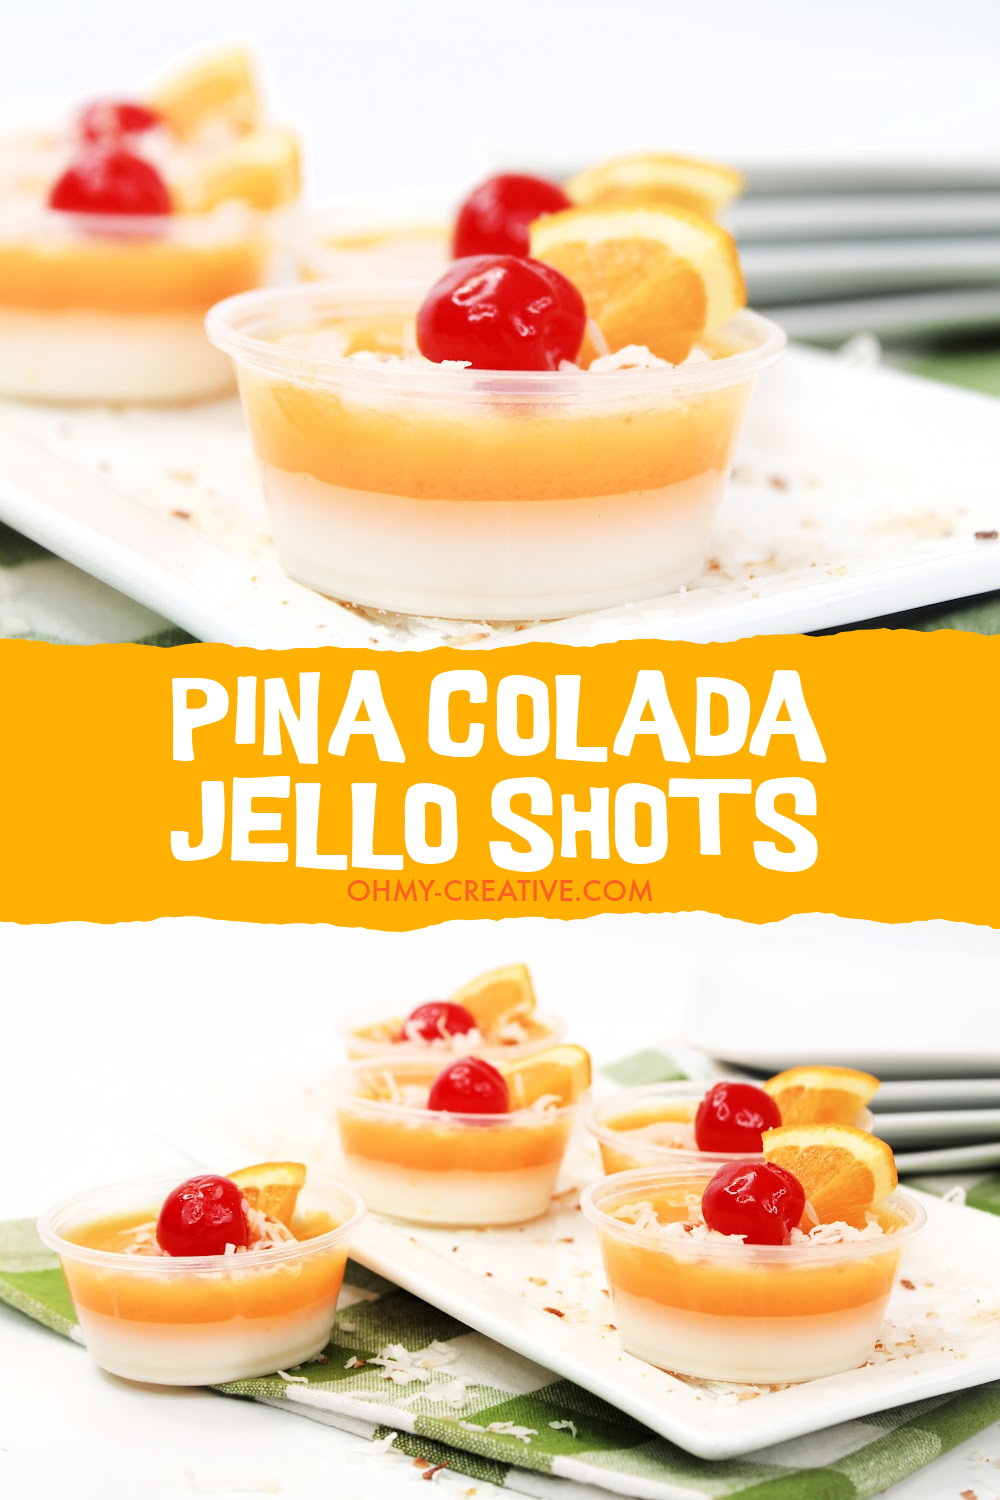 Pina Colada jello shots served on a white plate with a green checked napkin.